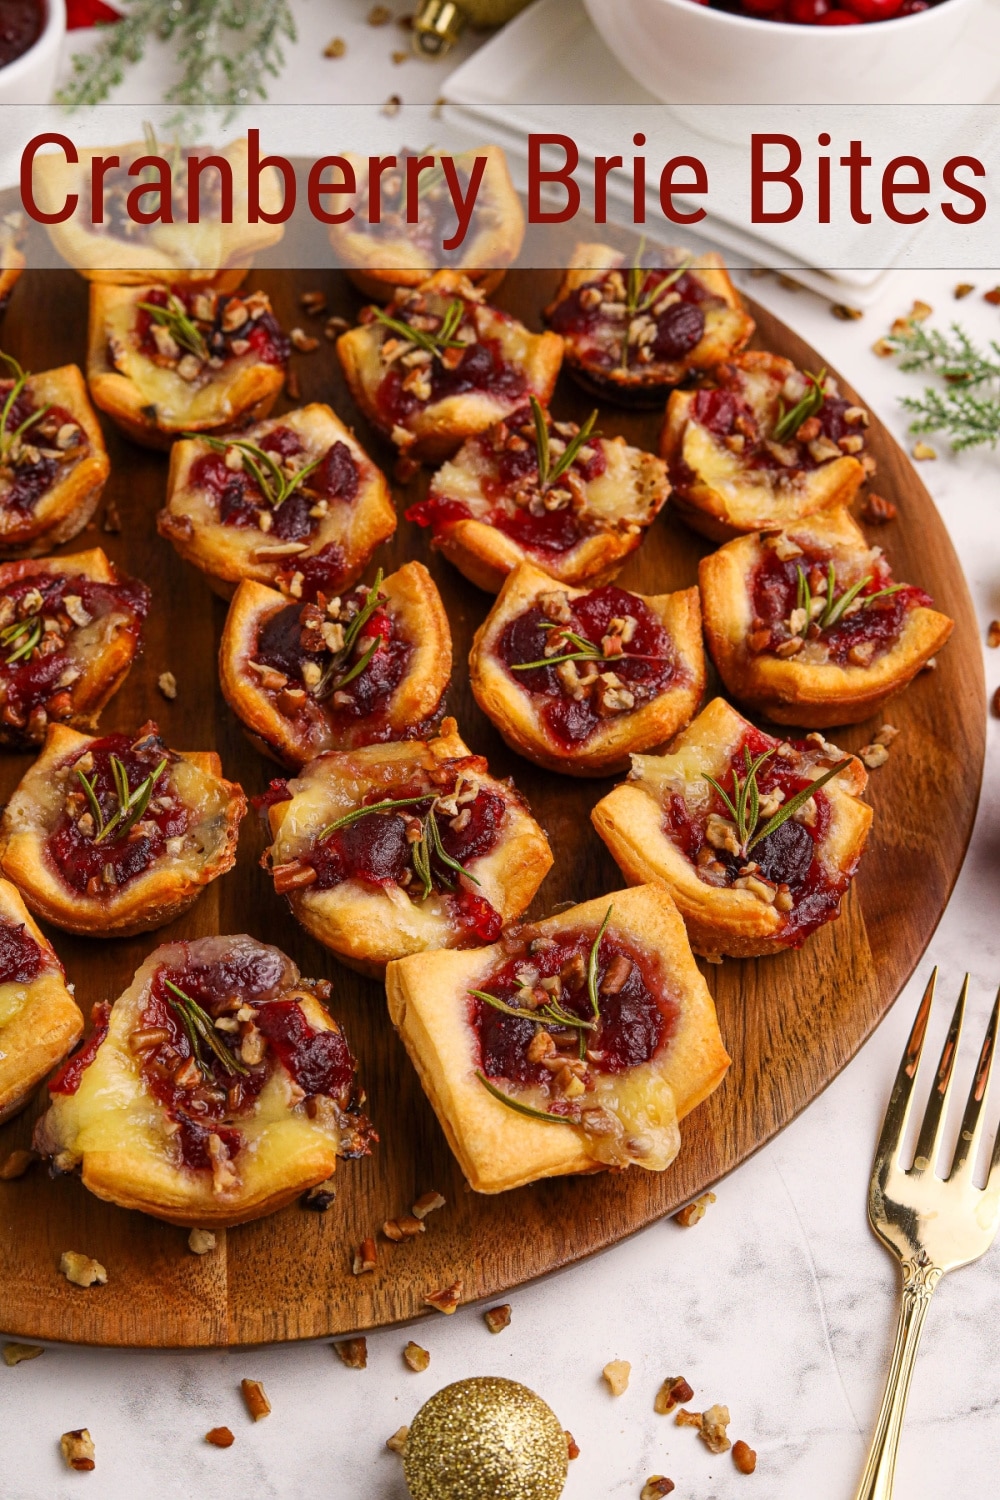 Indulge in the ultimate crowd-pleaser—miniature baked Brie enveloped in buttery crescent dough. Each bite unveils a perfect blend of gooey cheese, sweet-tart cranberry sauce, toasted pecans, and a touch of rosemary for a memorable appetizer bite. These cranberry Brie bites are perfect for the holiday season. via @cmpollak1